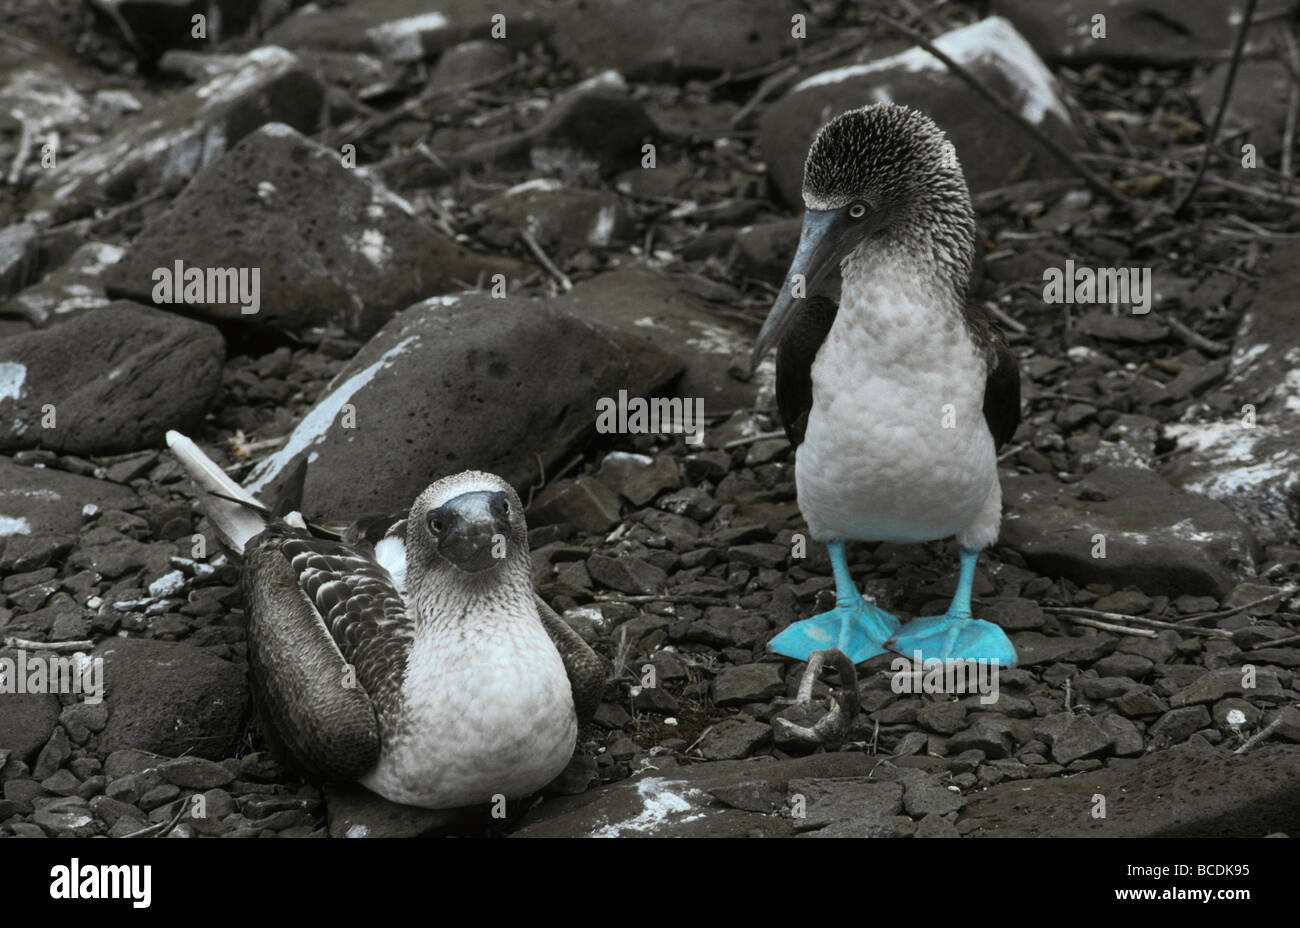 A breeding male and female Blue Footed Booby pair nesting. Stock Photo